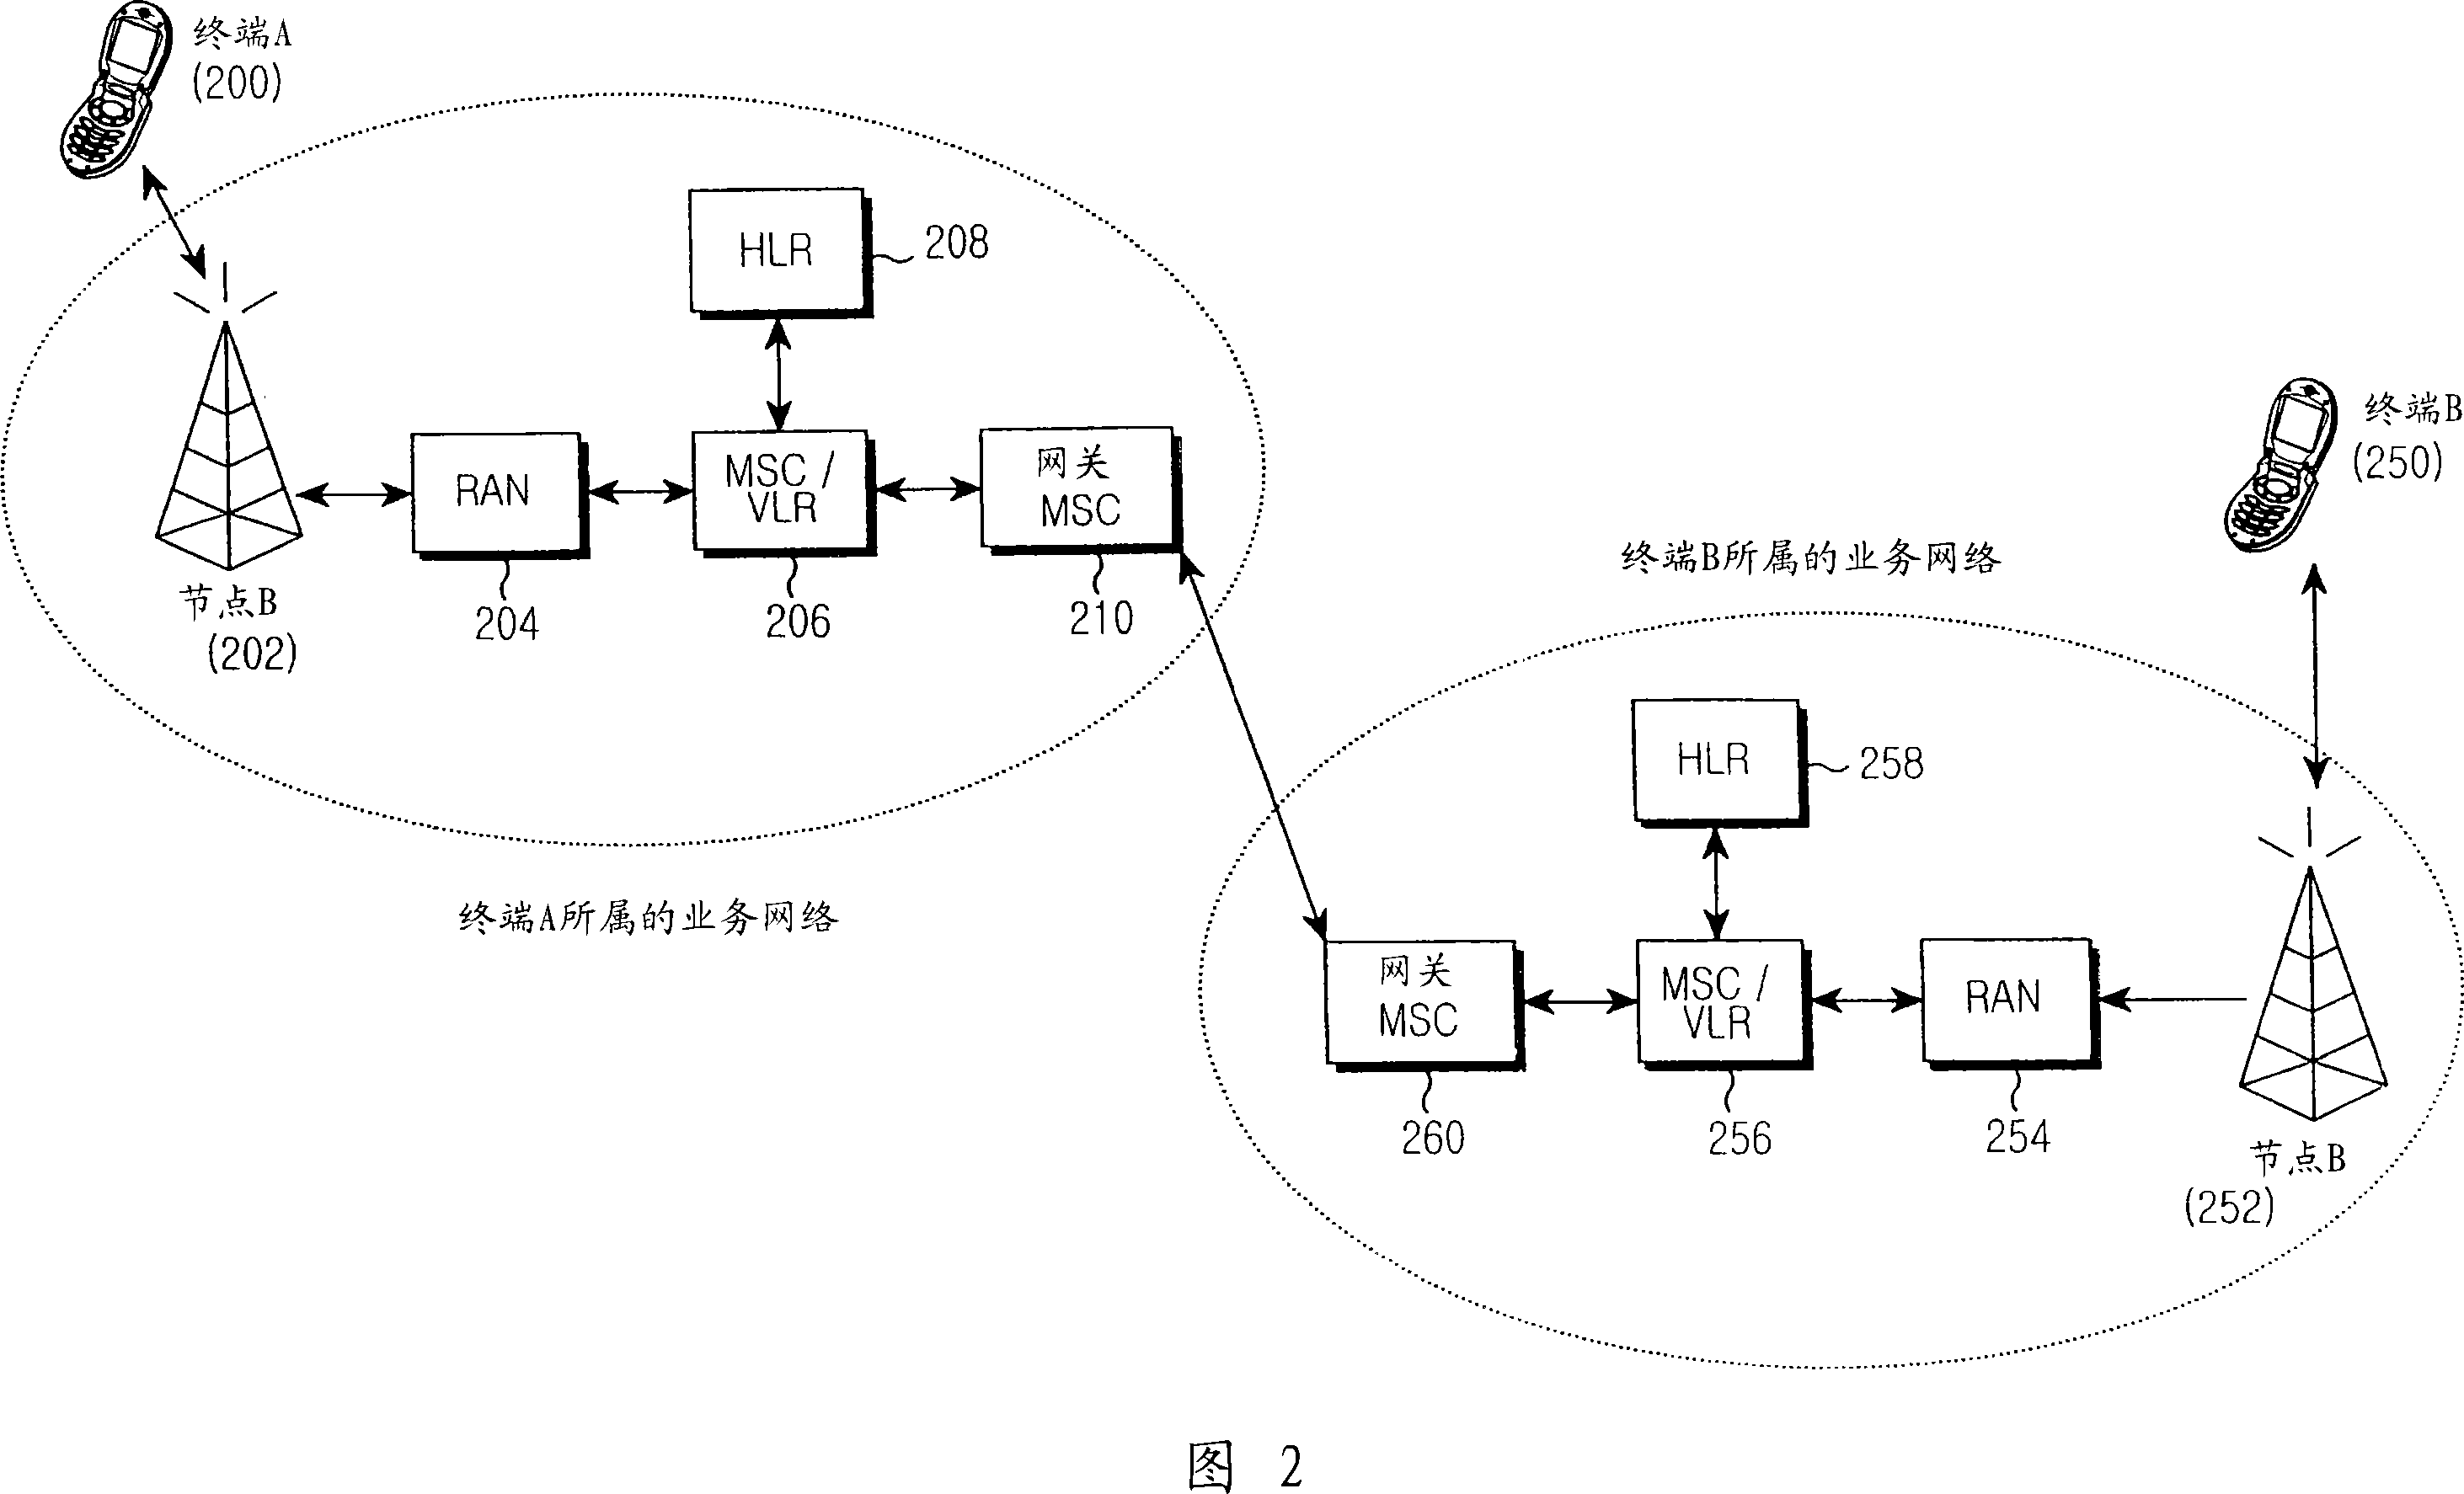 Method and apparatus for video telephony in mobile communication terminal